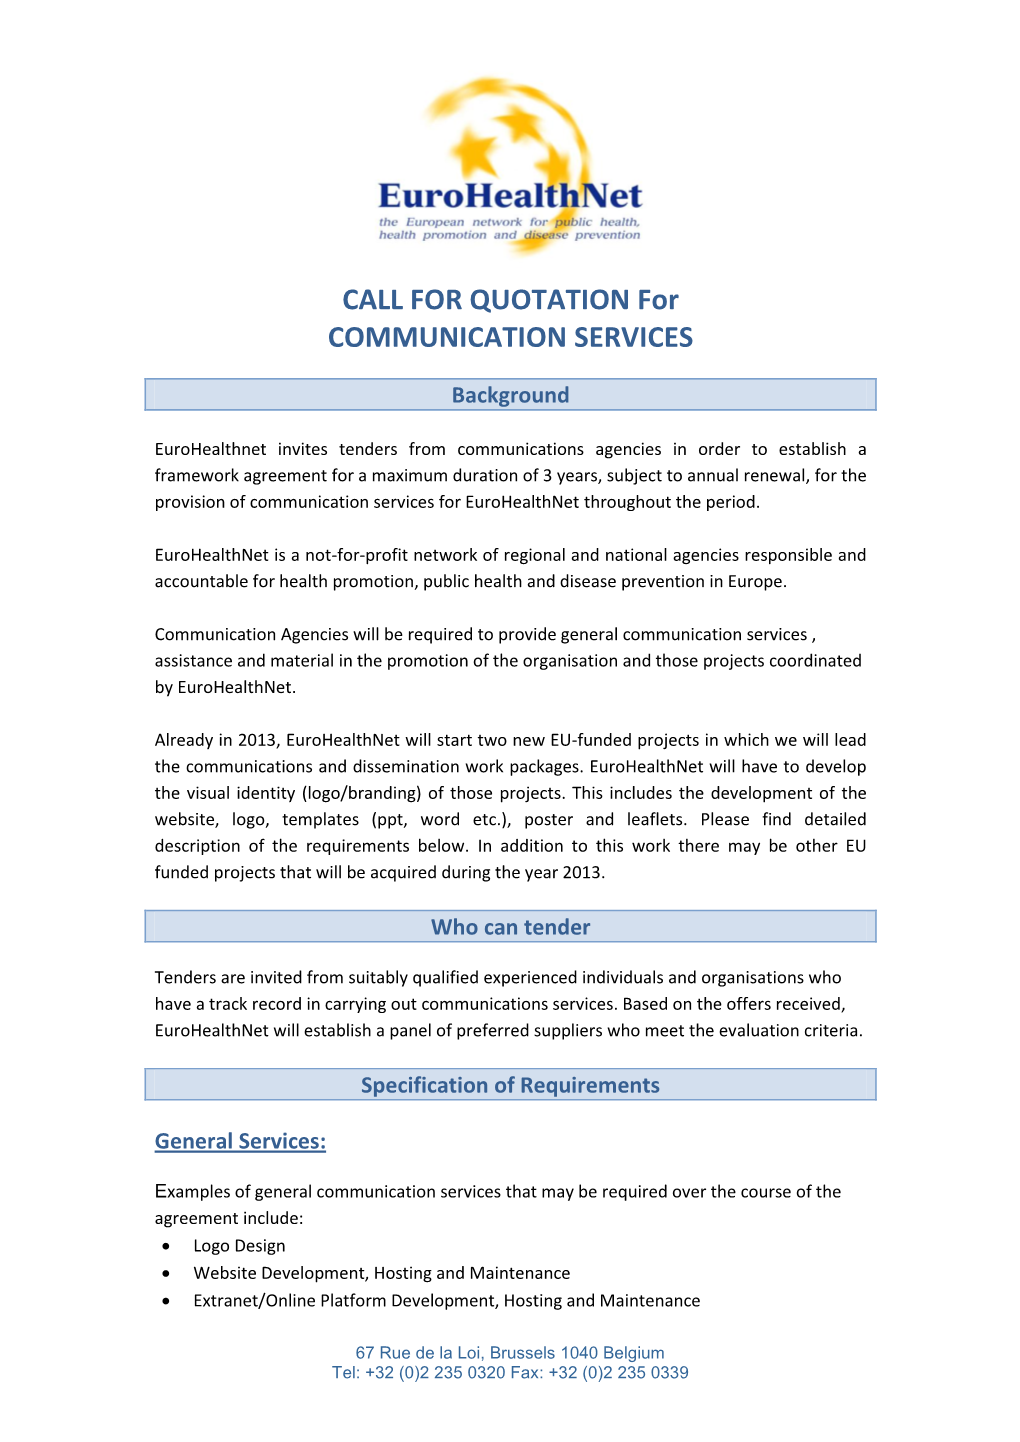 CALL for QUOTATION for COMMUNICATION SERVICES